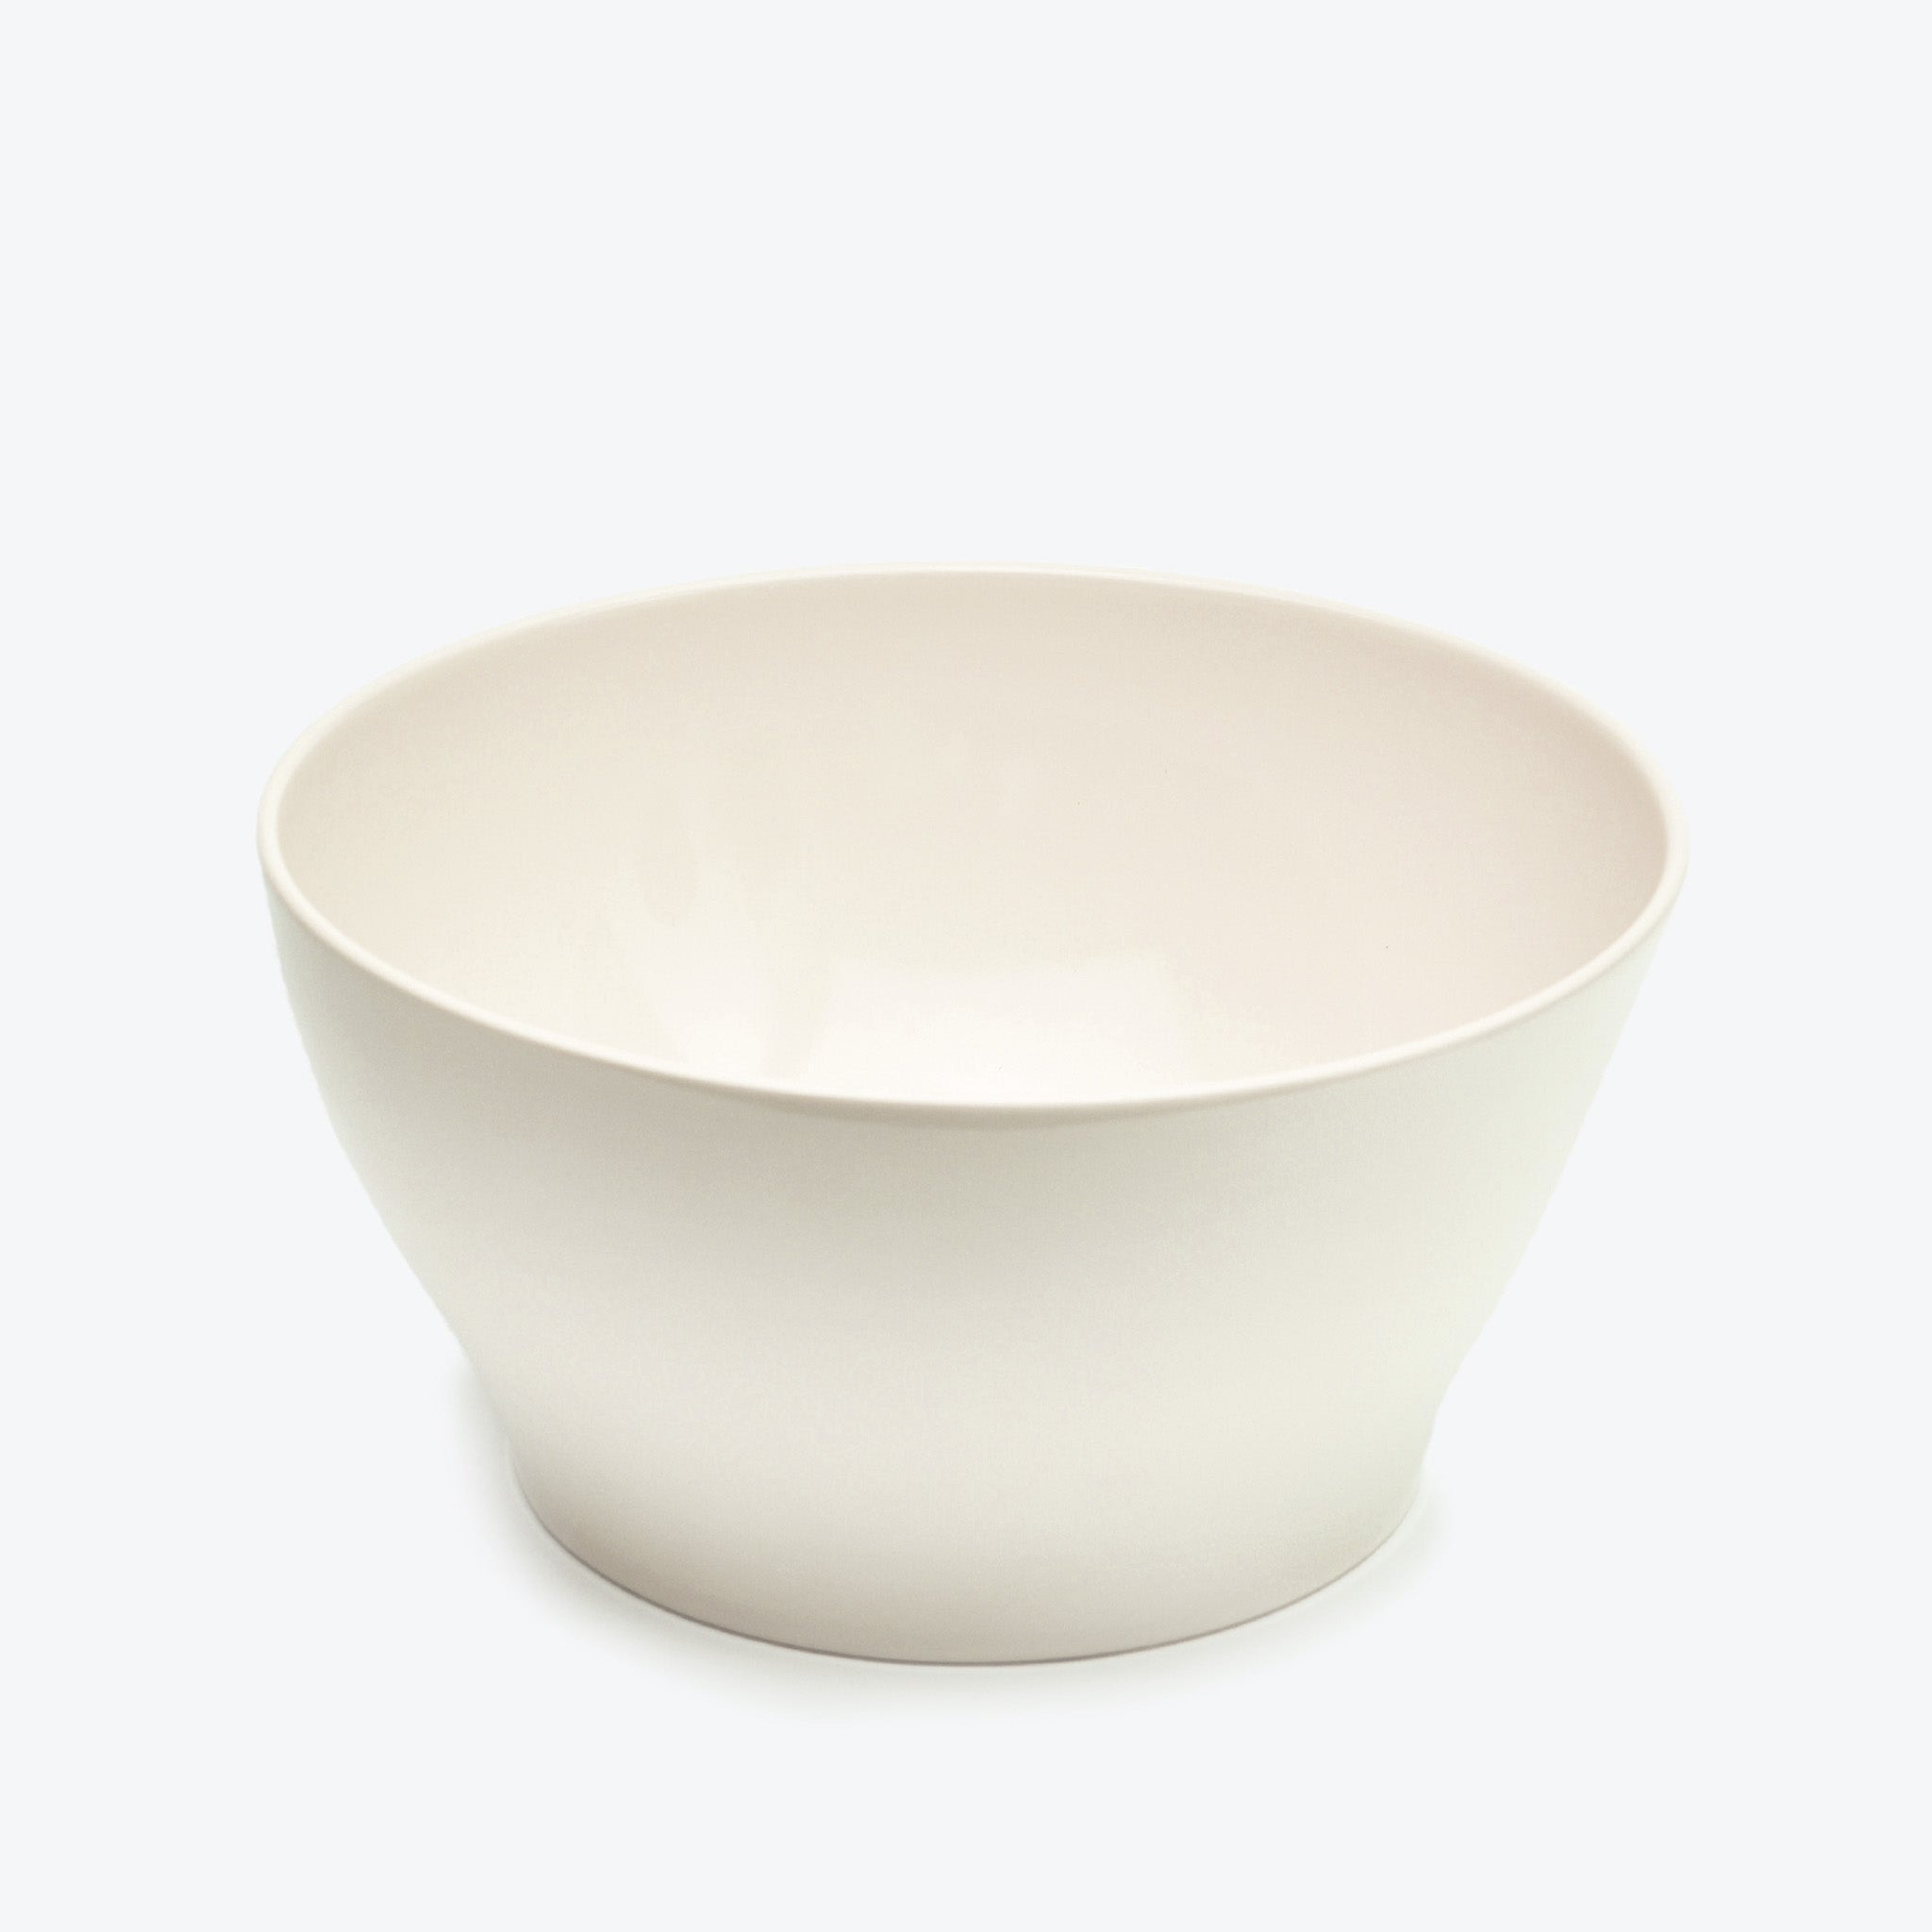 Bowl by John Pawson for When Objects Work